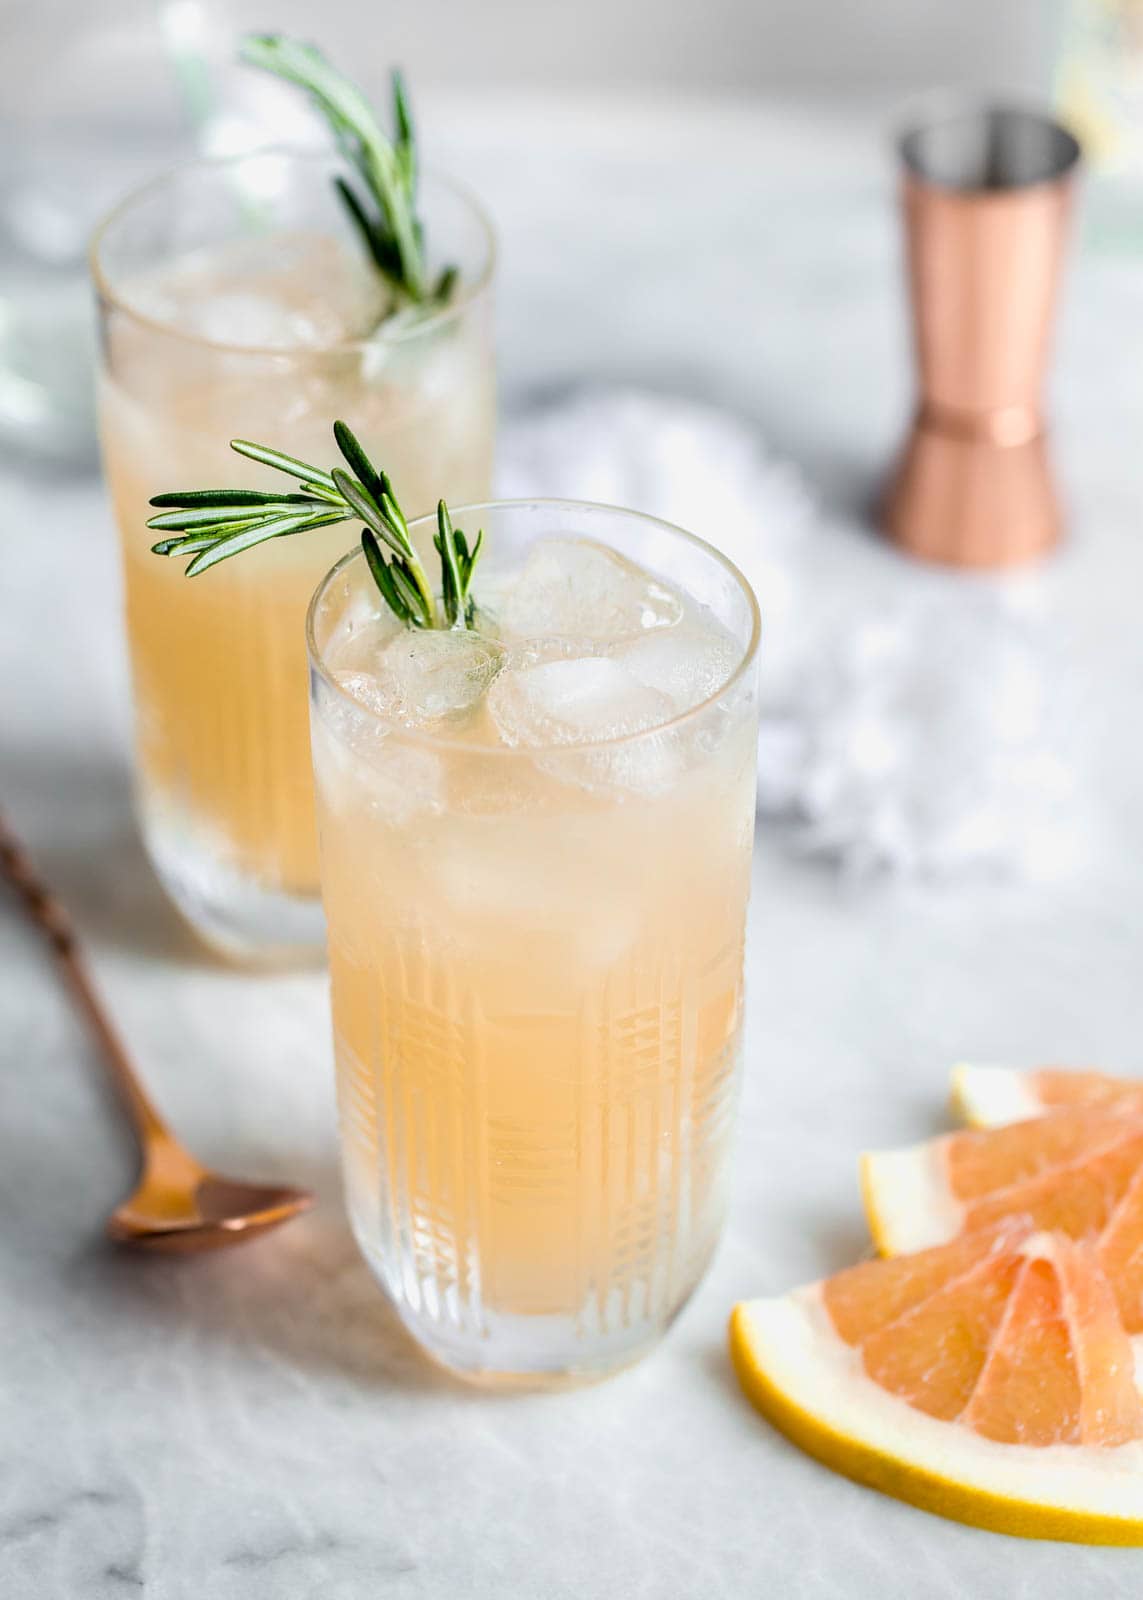 Named after the iconic dancer Ginger Rogers, this refreshing cocktail is made with fresh grapefruit juice, homemade ginger syrup, and gin!